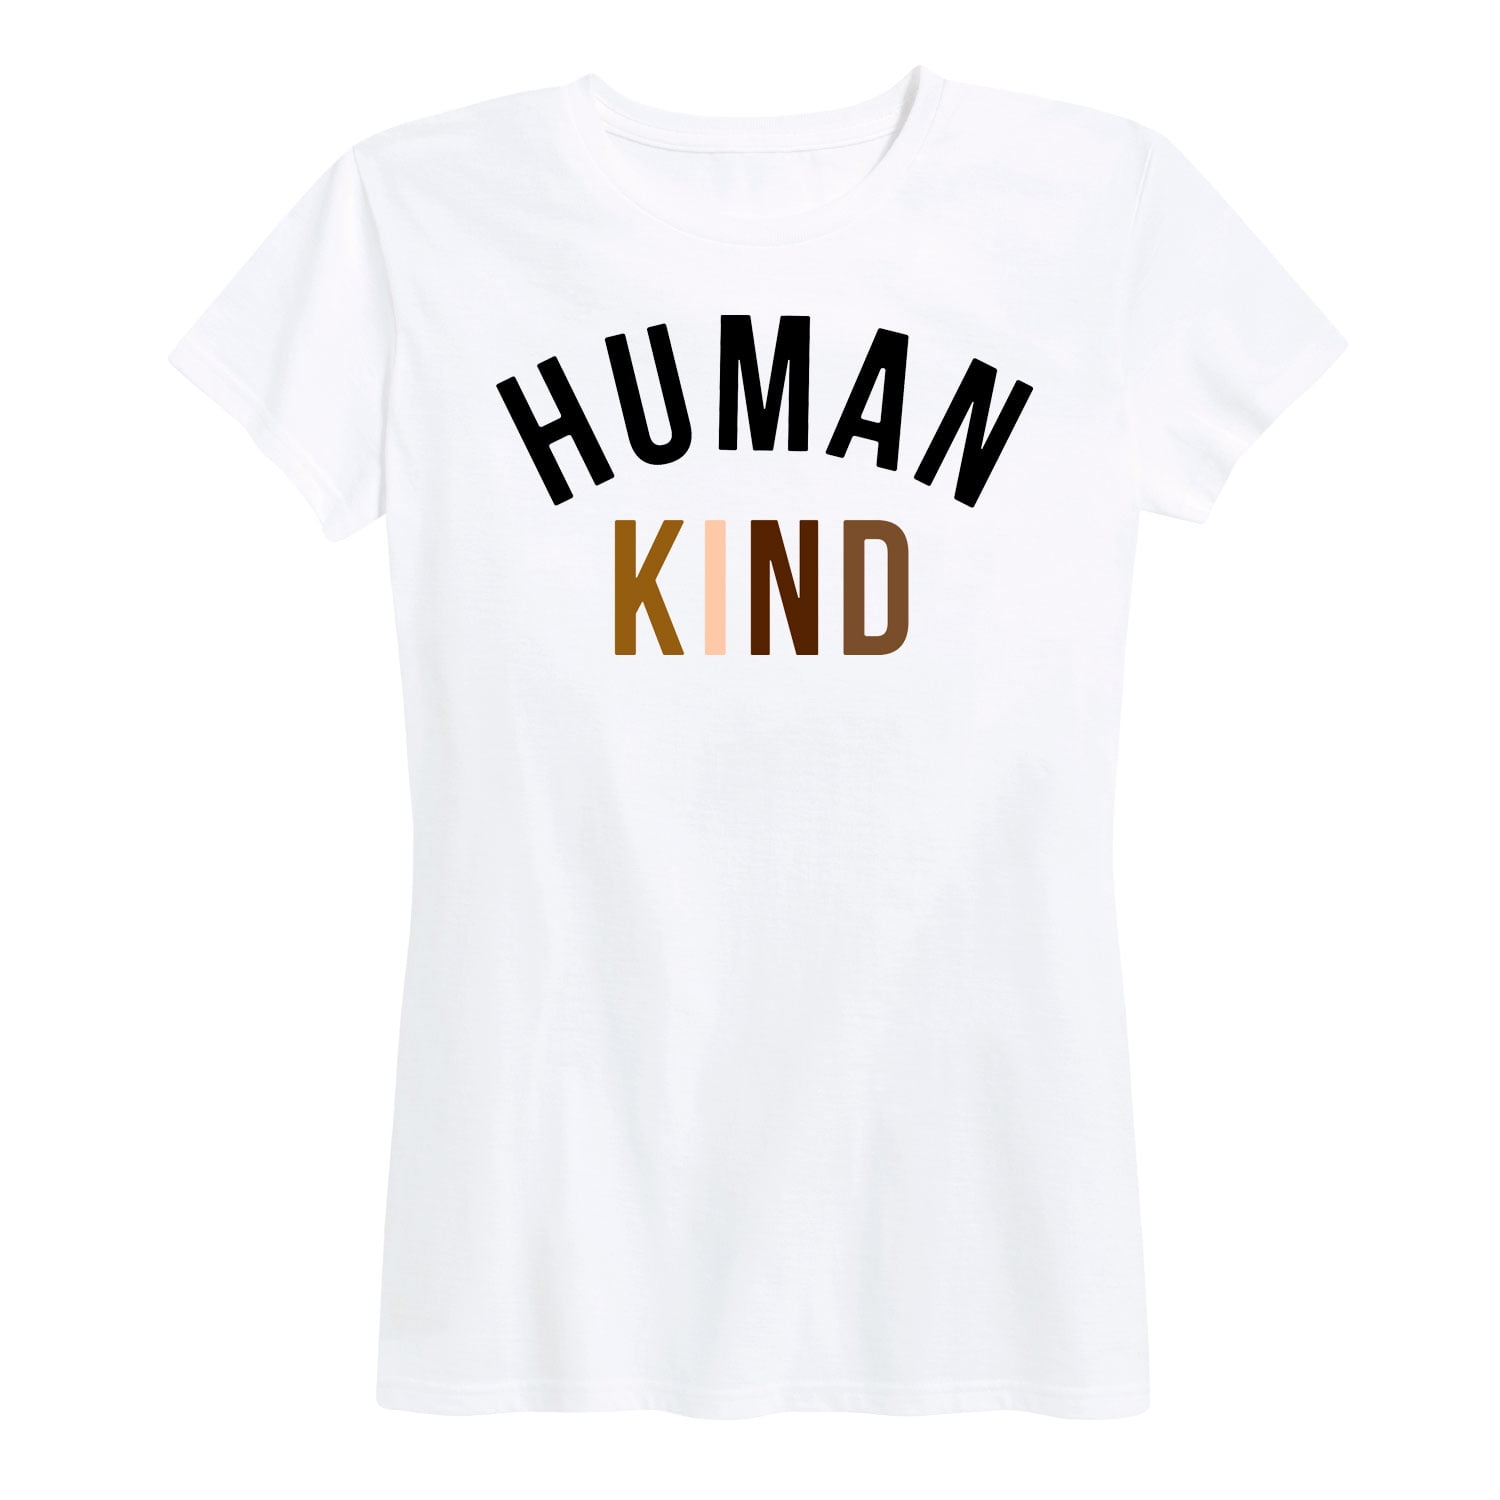 Human Kind Be Both,Kind shirt,Kindness shirt,Mommy and Me outfits,Mommy and Me shirts,Be Kind hoodie,Kind t-shirt Kindness Be kind tee